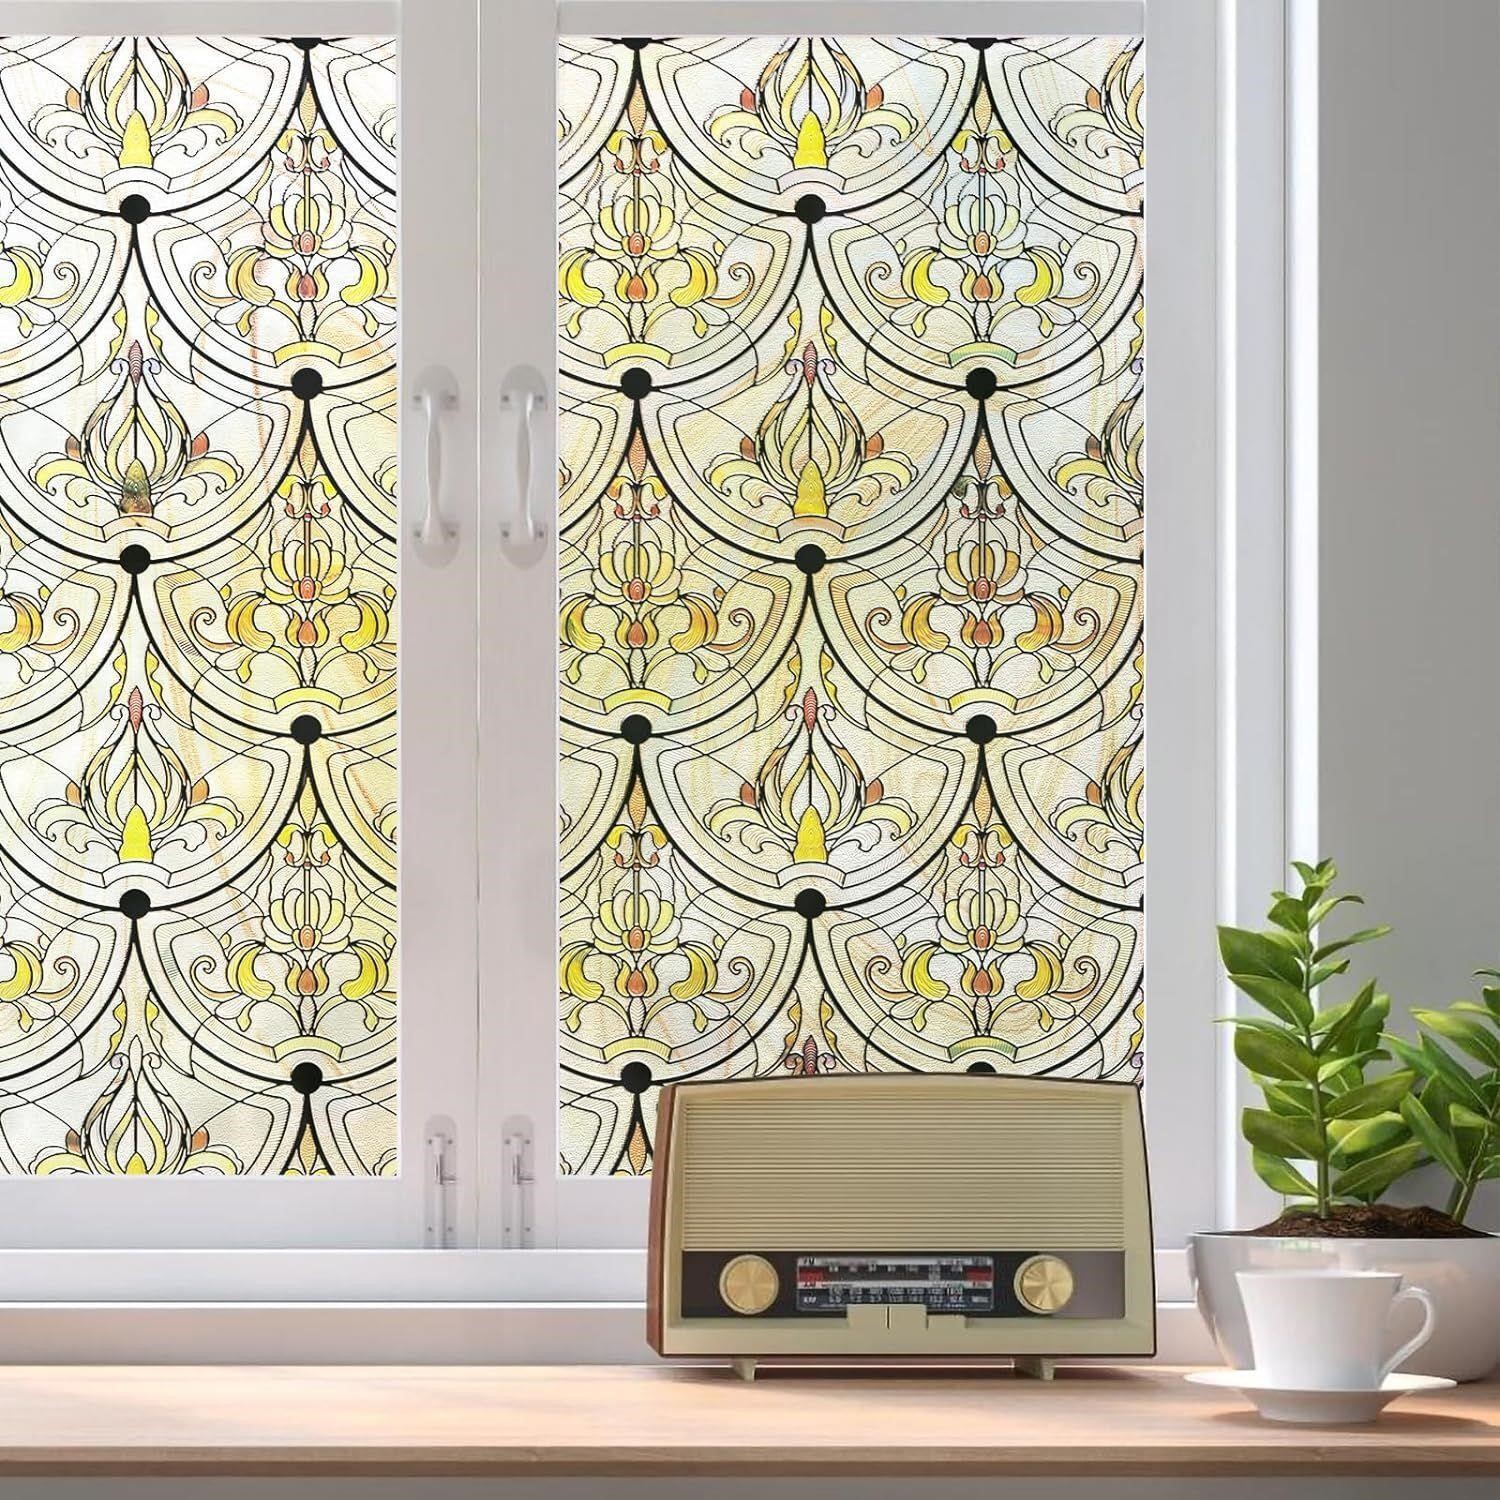 3D Stained Glass Window Film 23.6inch x 35.4inch